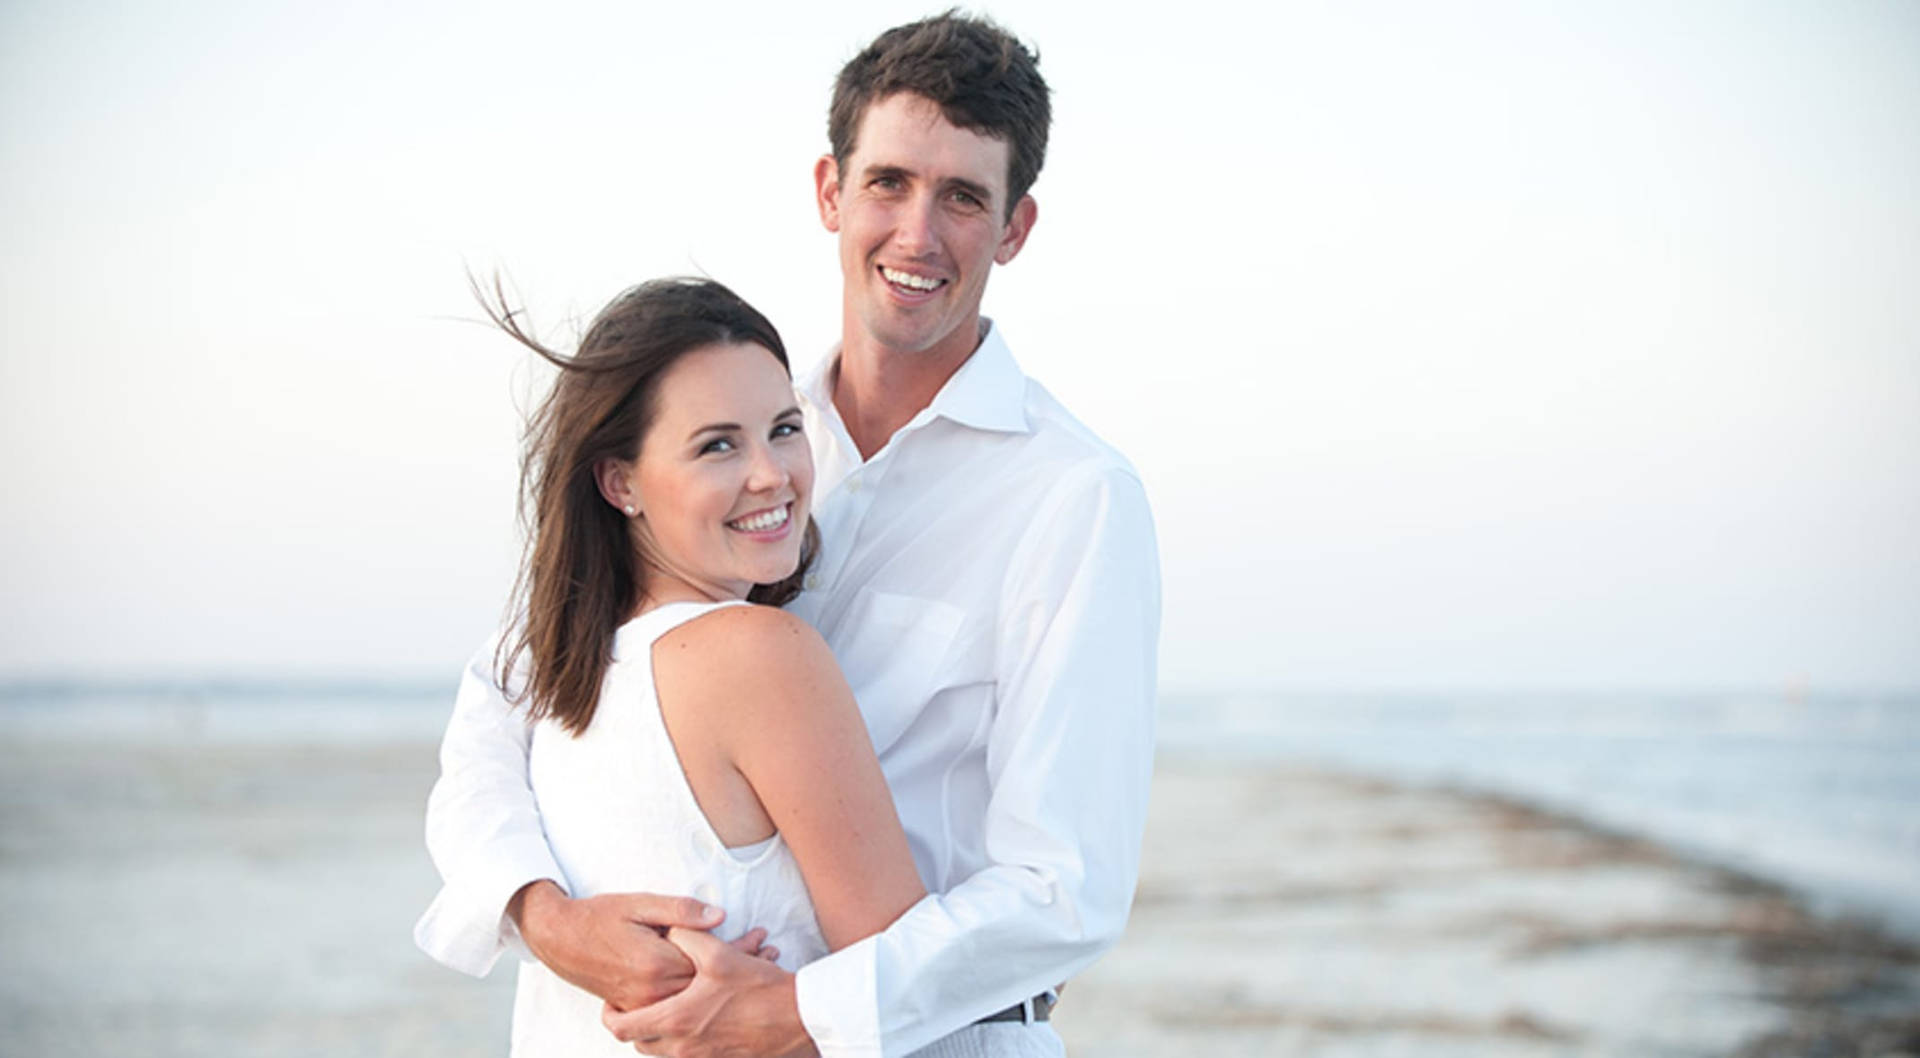 Download Chesson Hadley With Wife On Beach Wallpaper